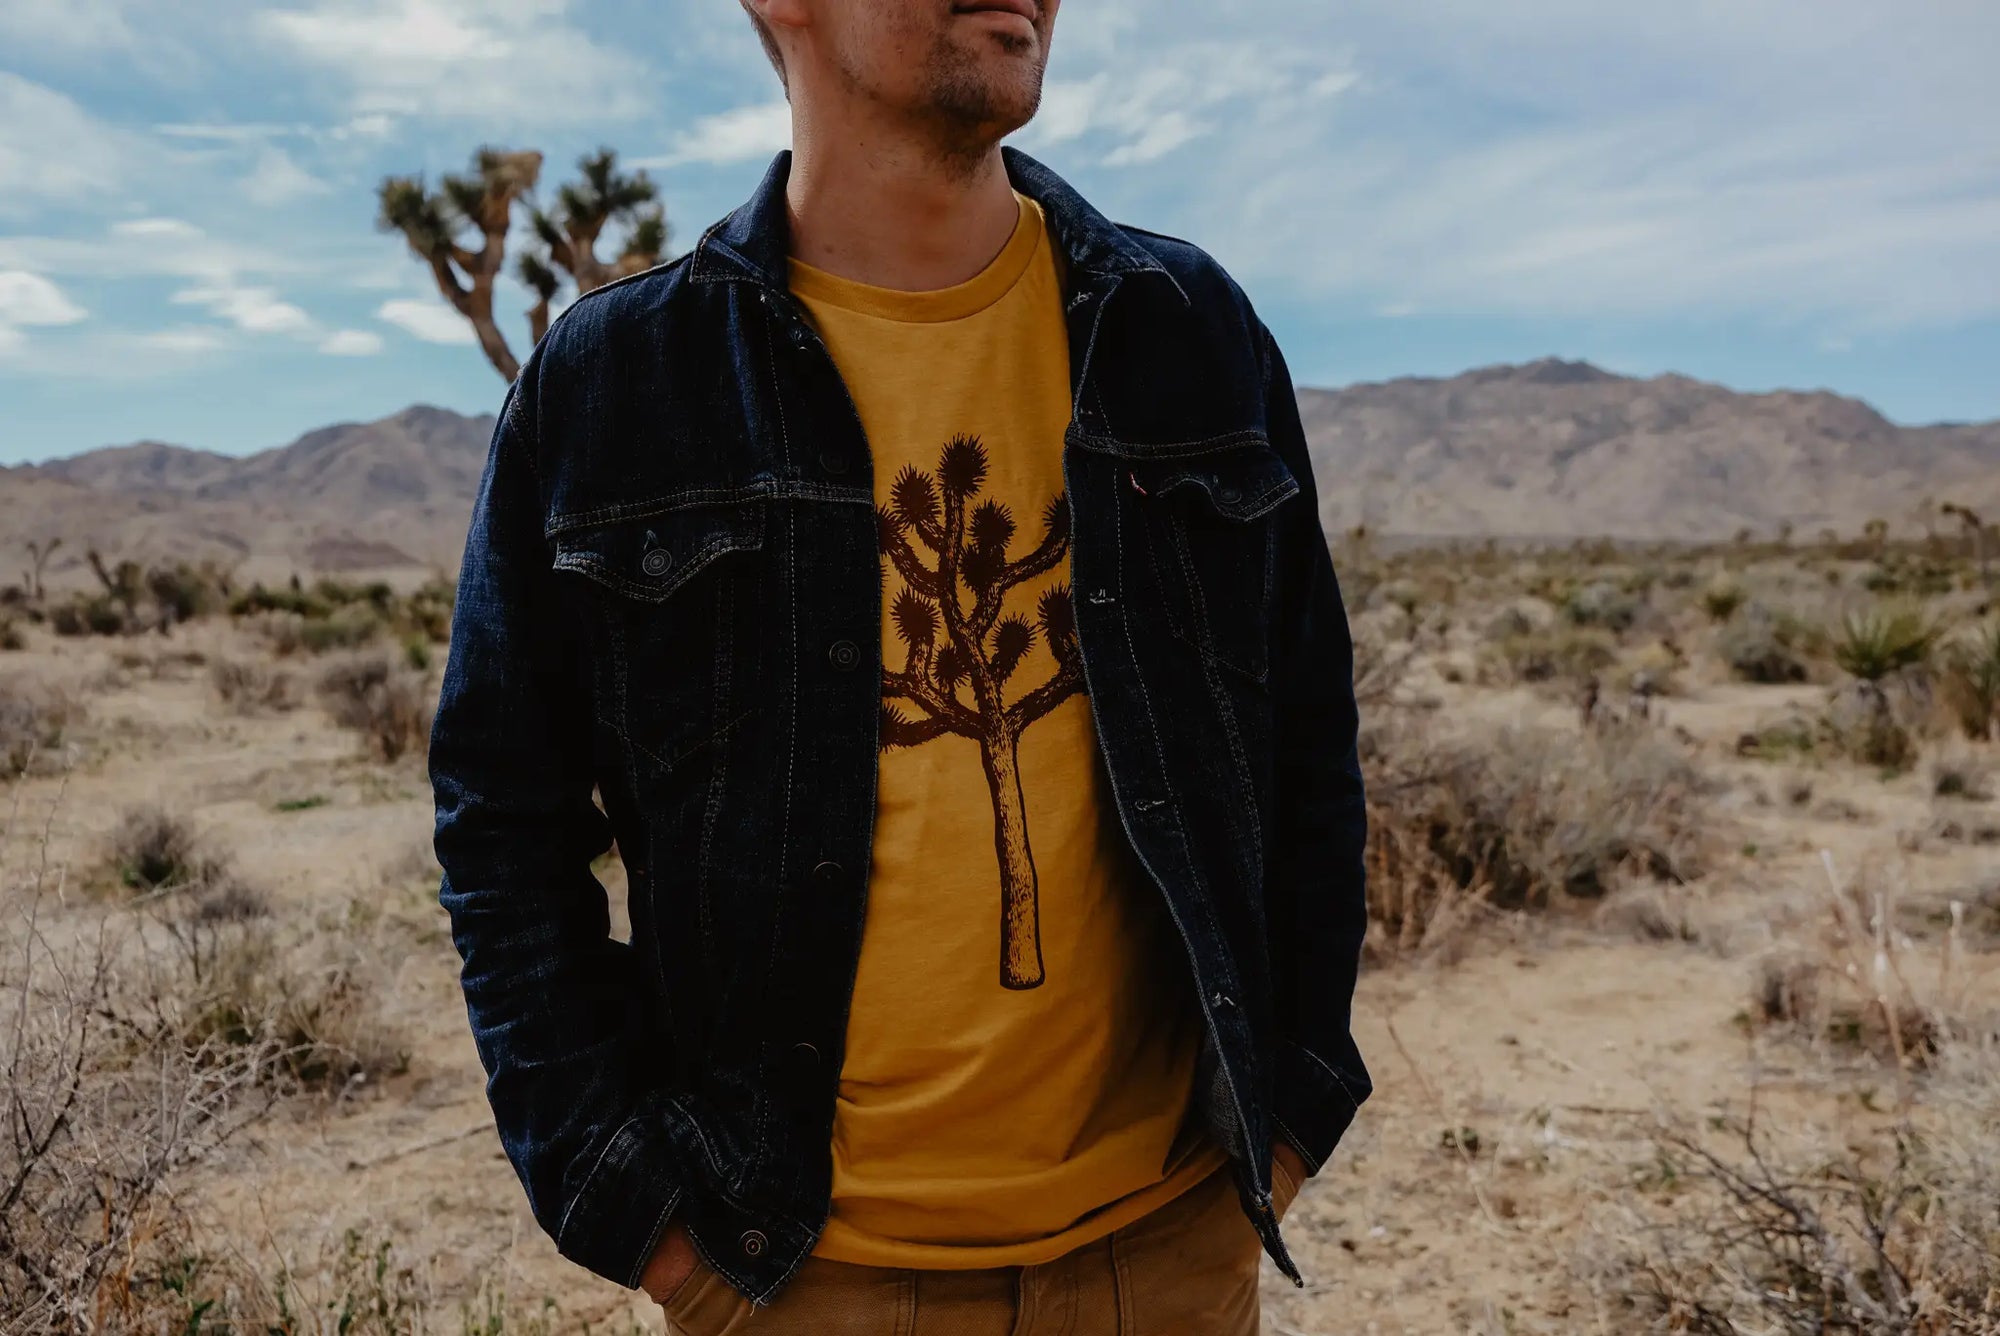 The Joshua Tree Tee by Moore Collection